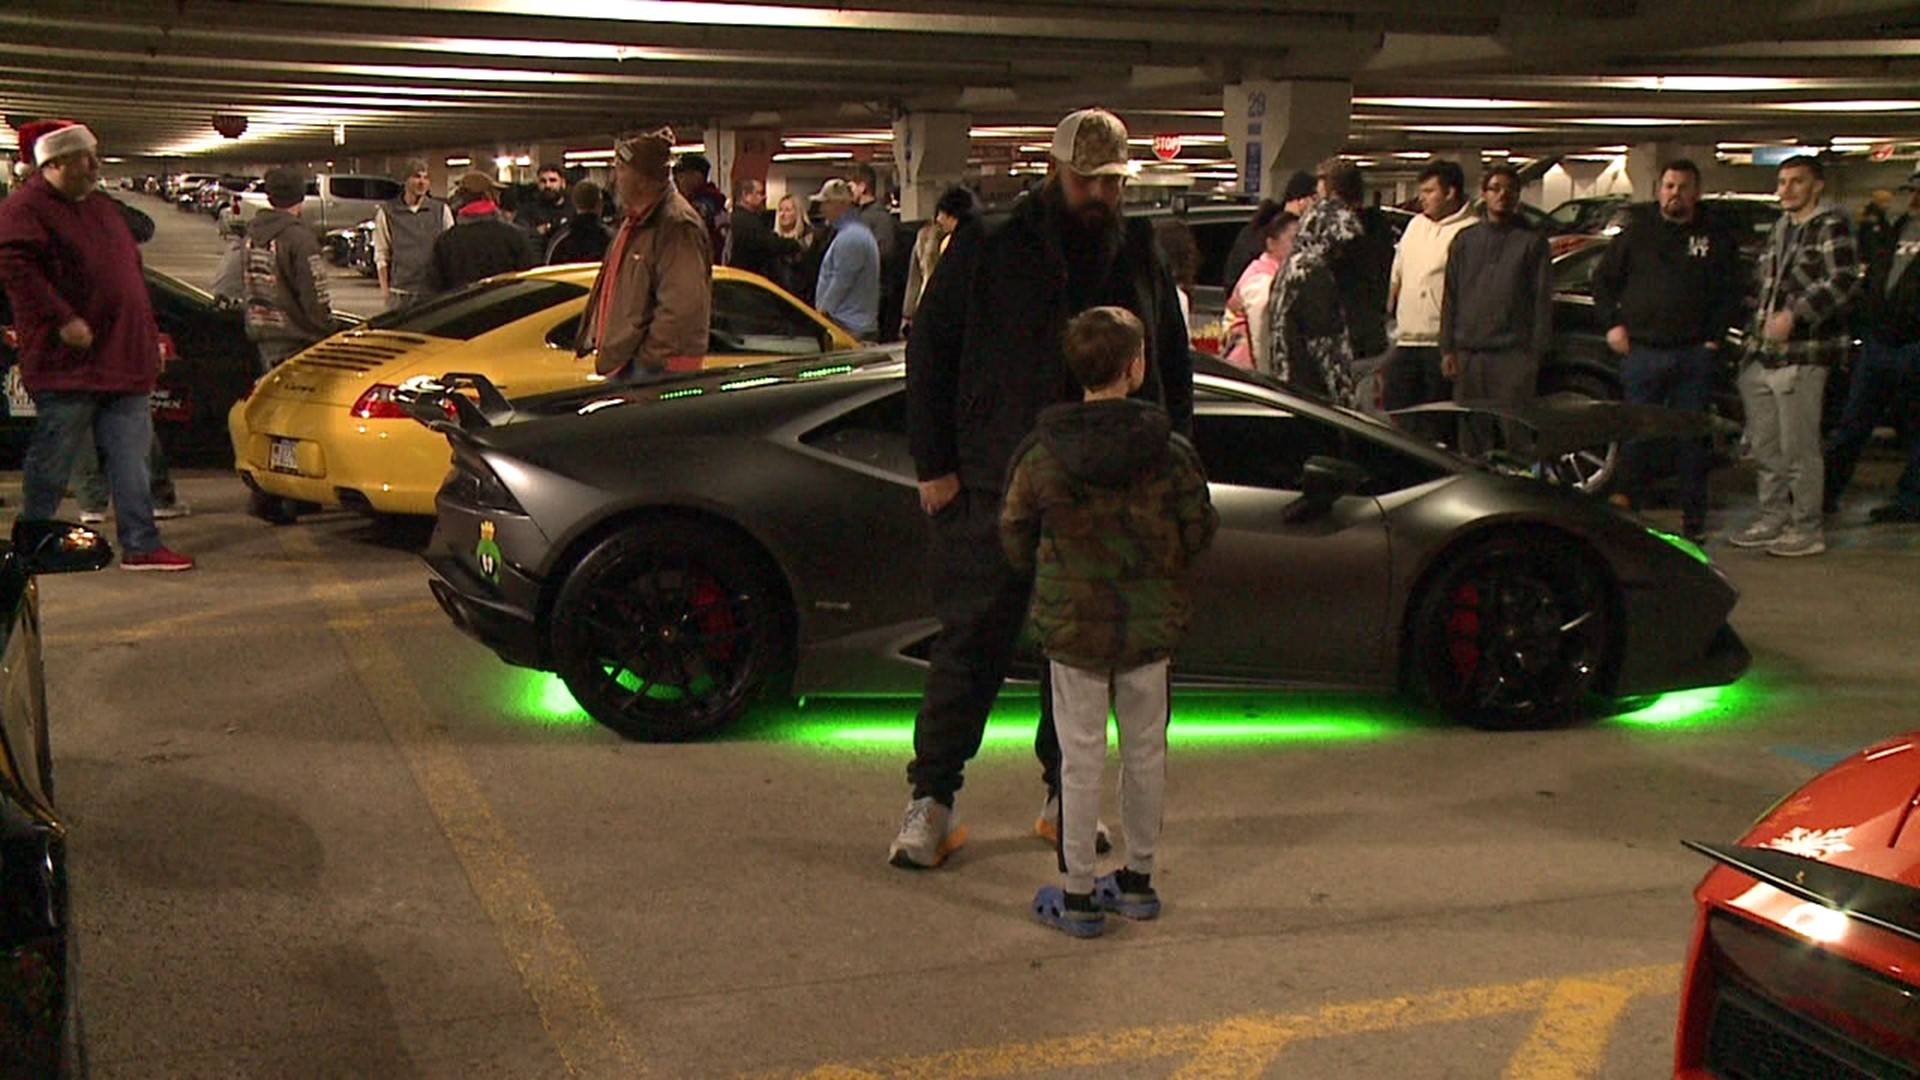 The car show was held at the parking garage at the Marketplace at Steamtown Saturday evening.